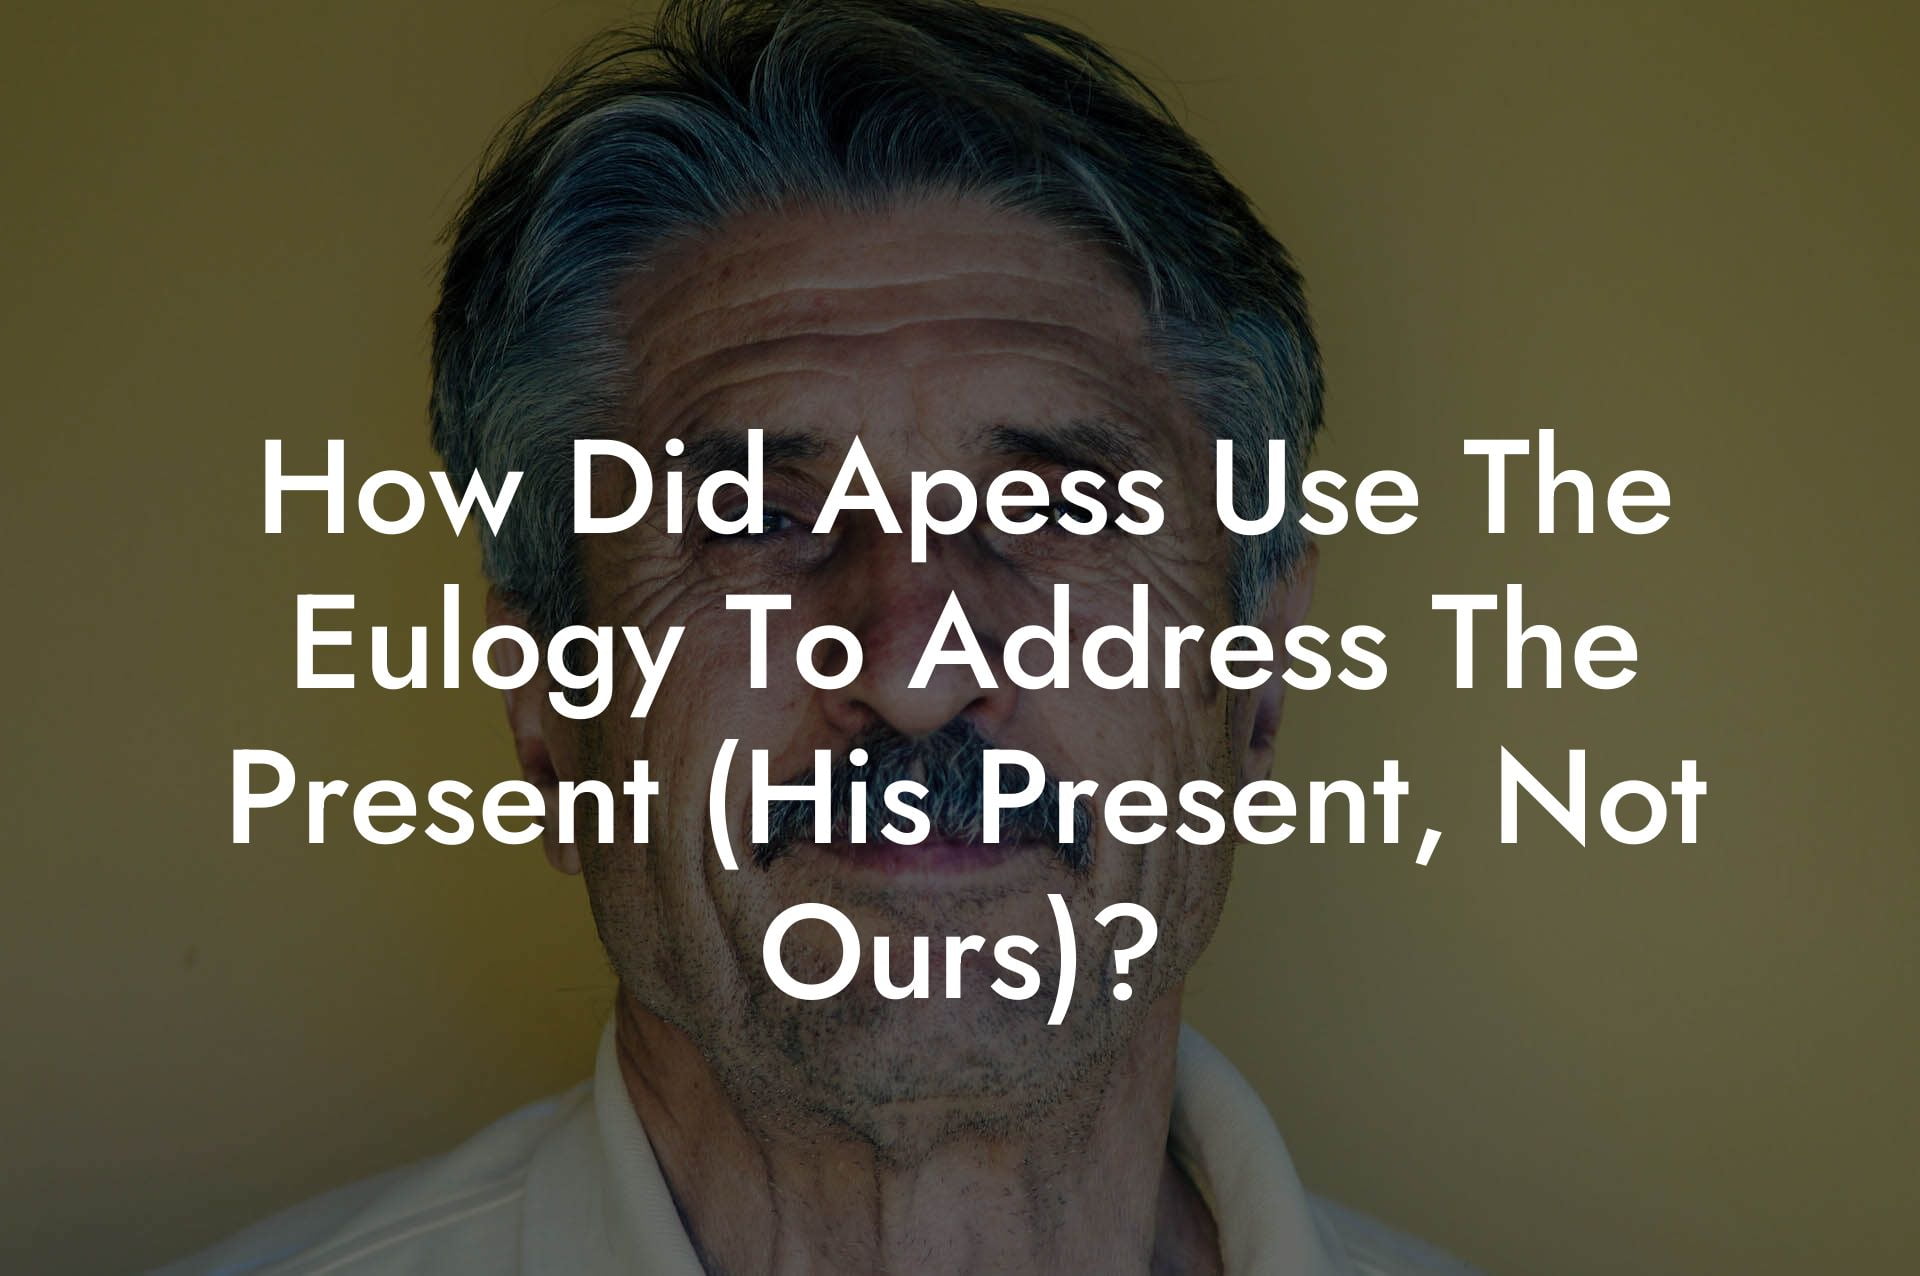 How Did Apess Use The Eulogy To Address The Present (His Present, Not Ours)?